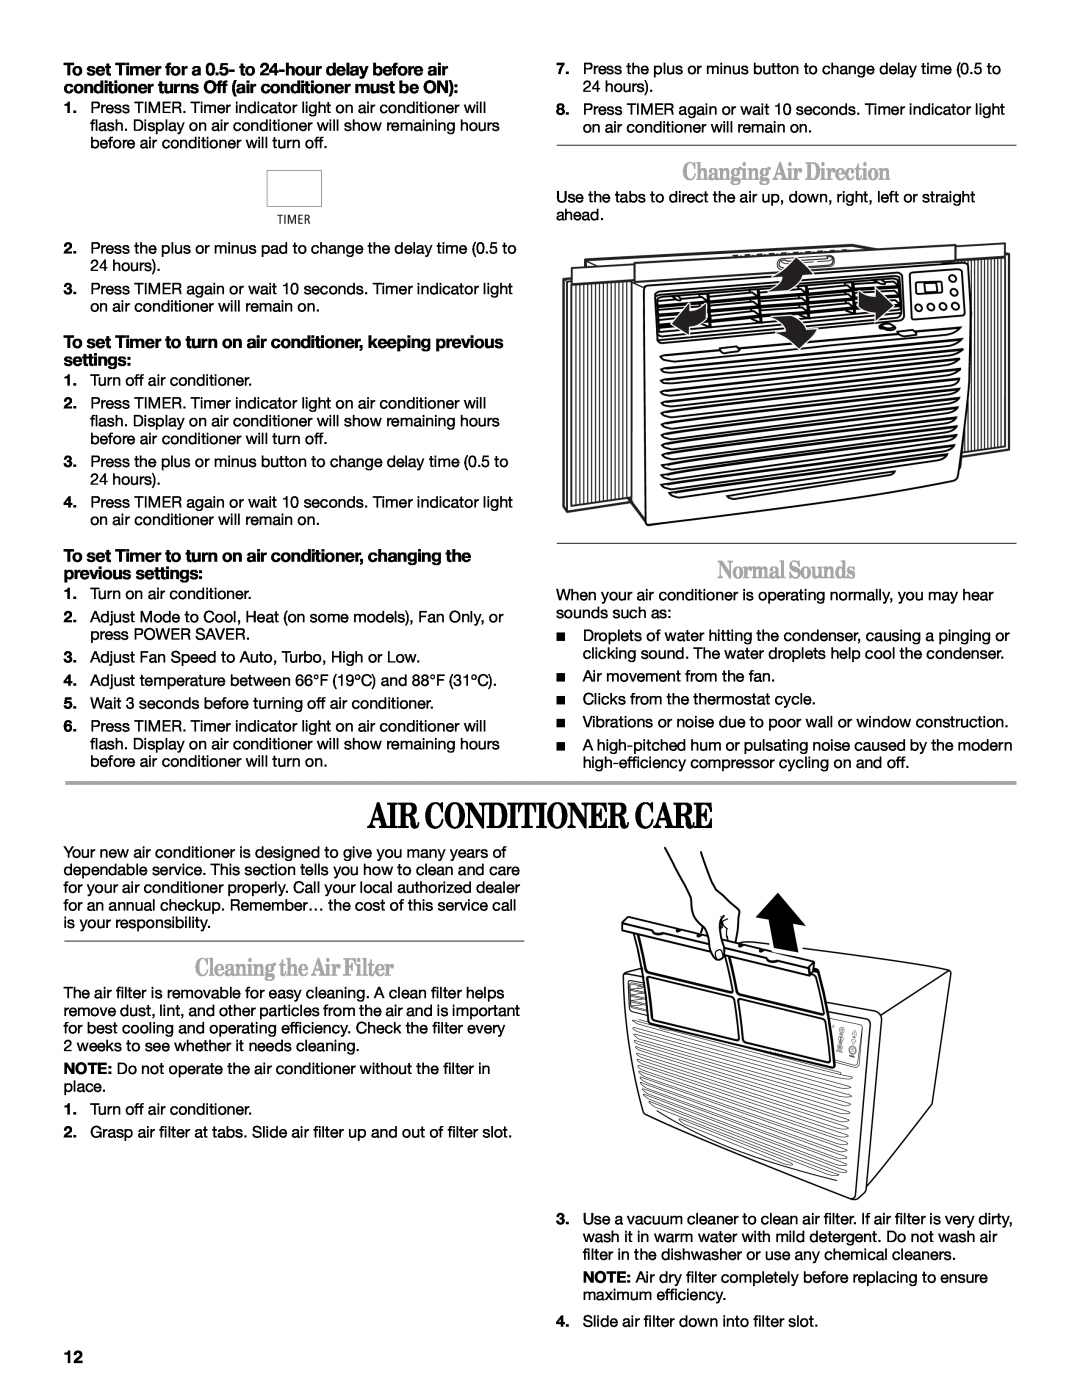 Whirlpool 1188177, 819041994 manual Air Conditioner Care, ChangingAirDirection, NormalSounds, CleaningtheAirFilter 